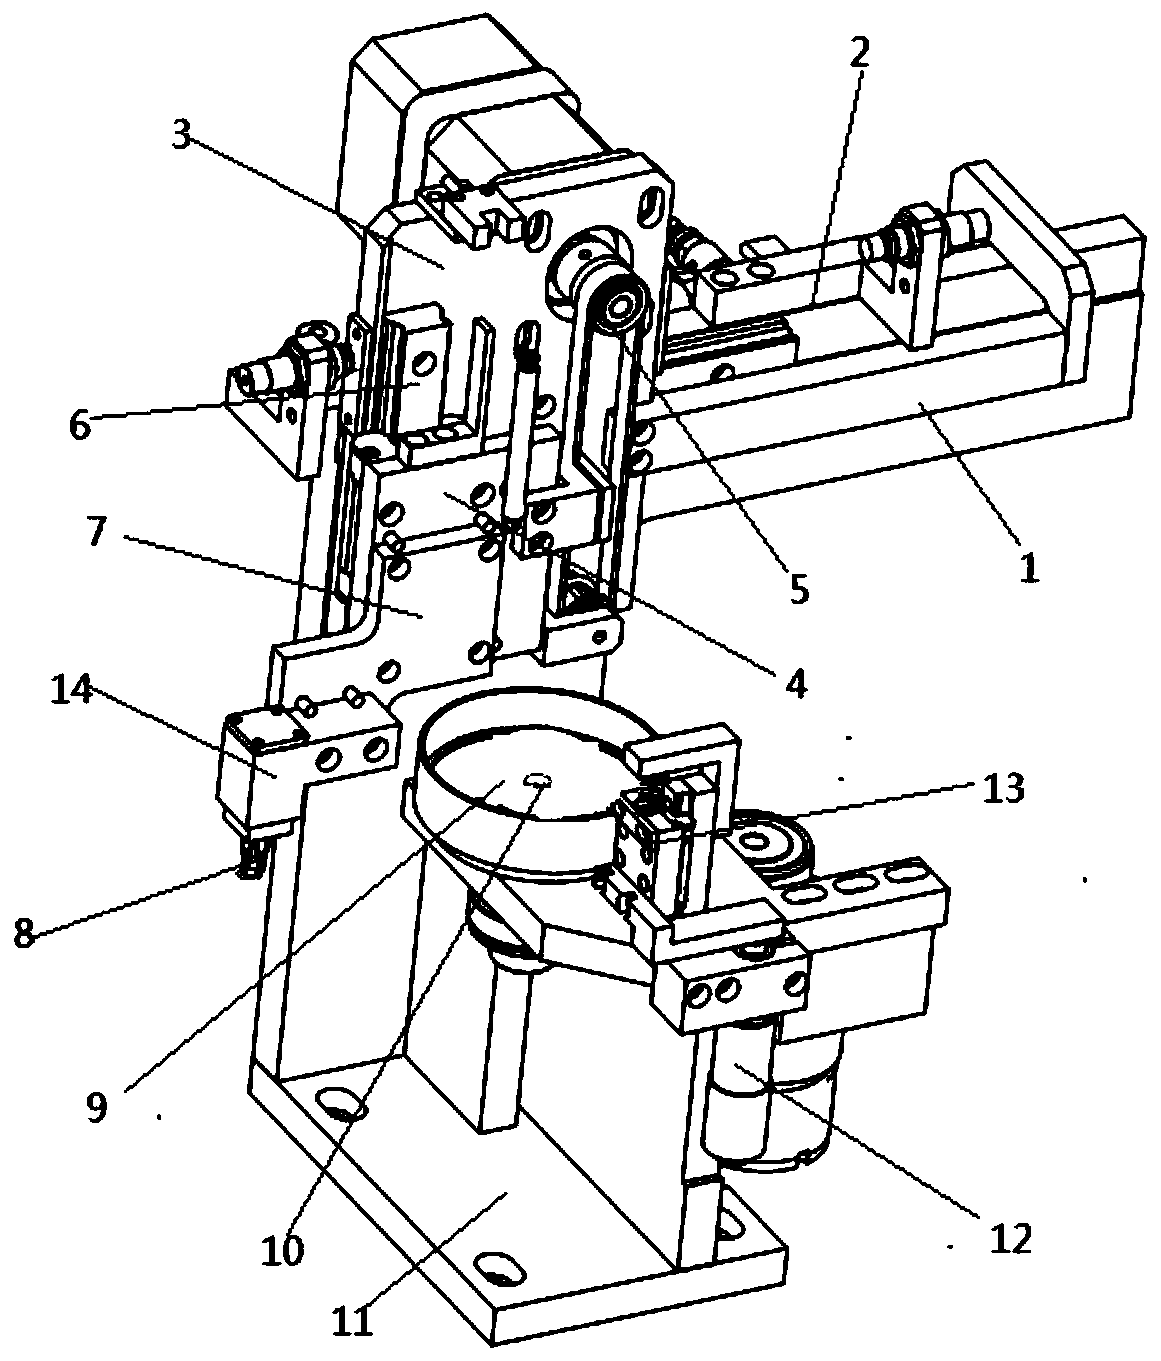 Electric automobile hub grinding device